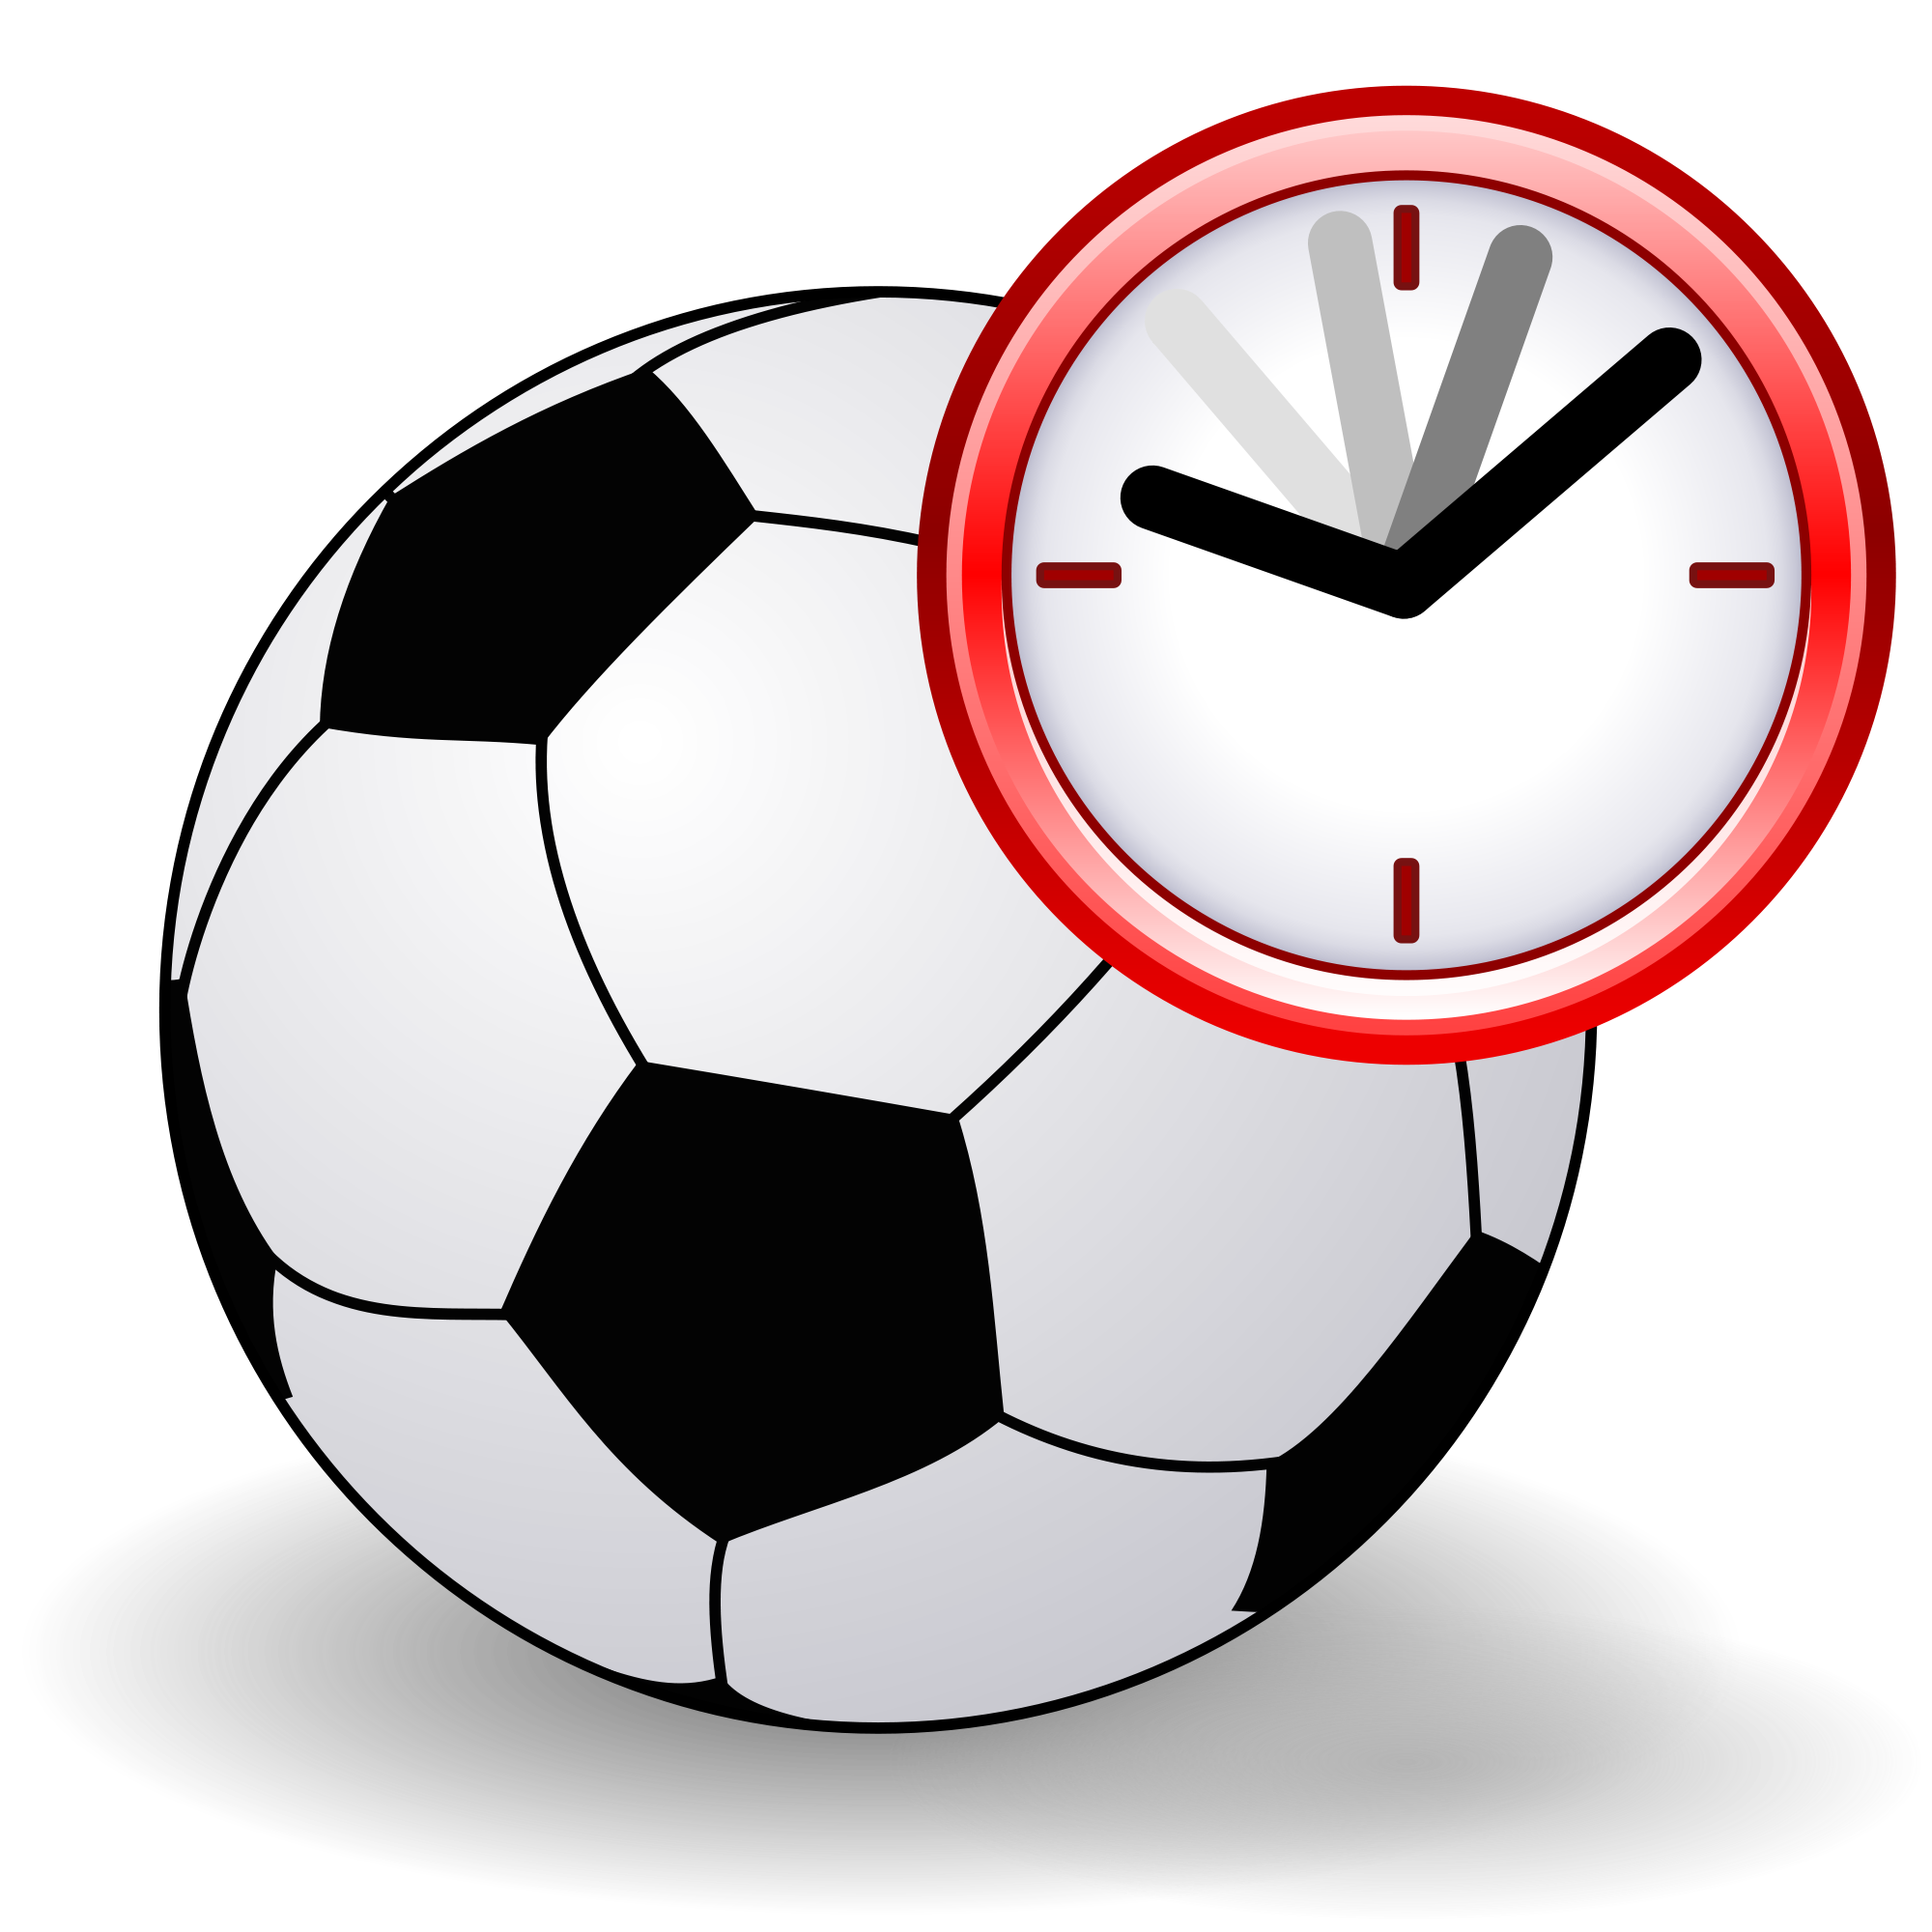 Image - Soccerball current event.svg.png - Snooker Wiki